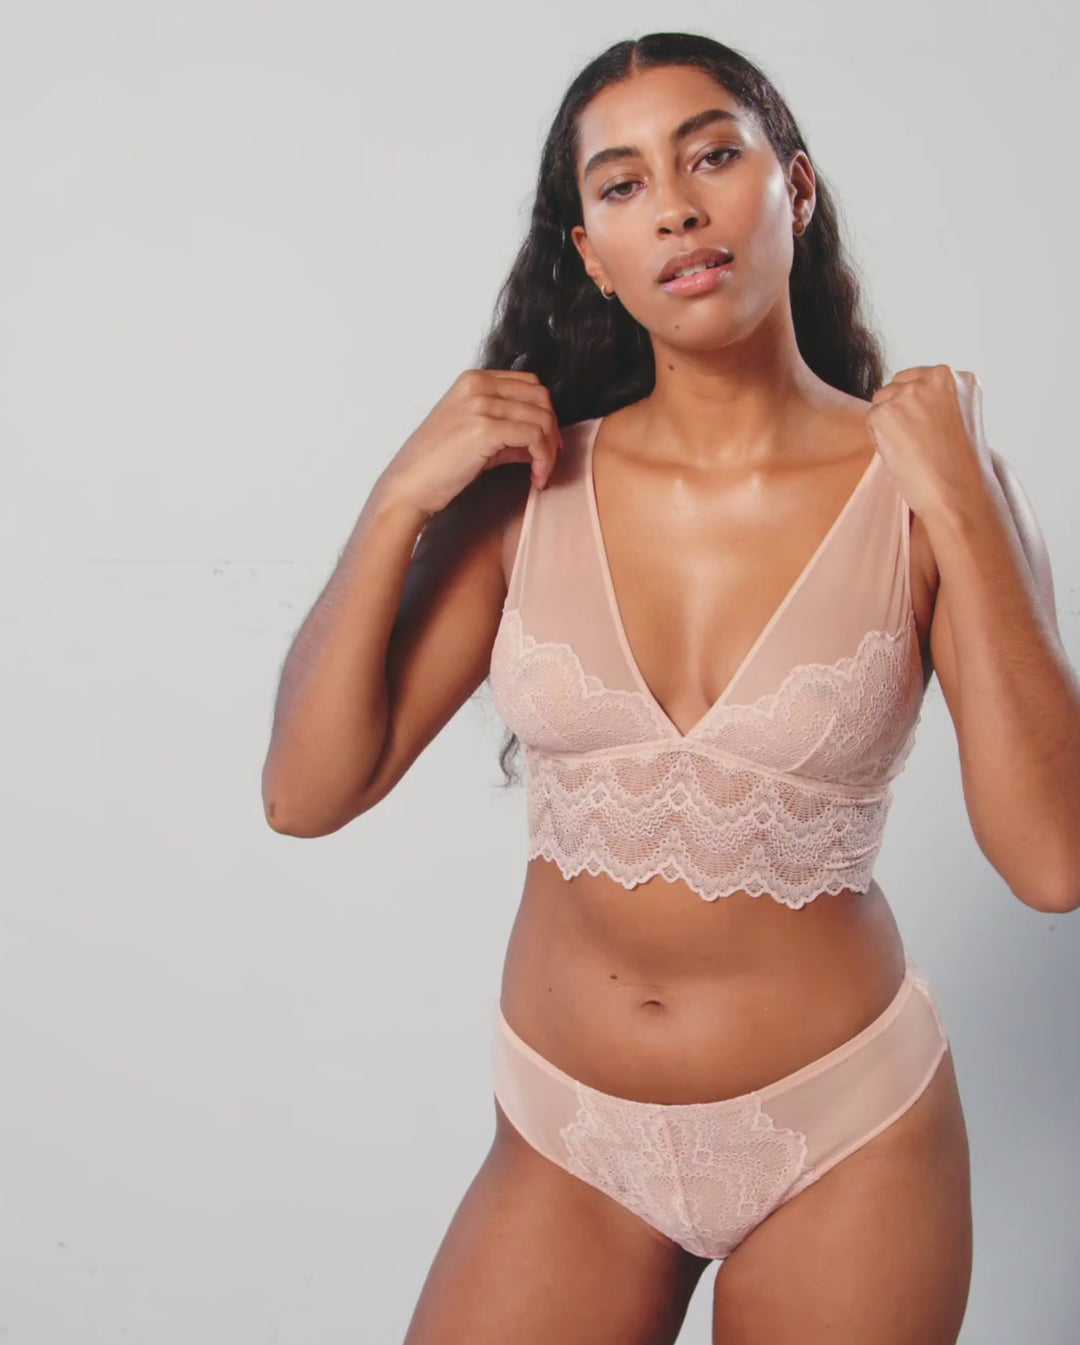 Lace Mesh Plunge Bralette Top Nude